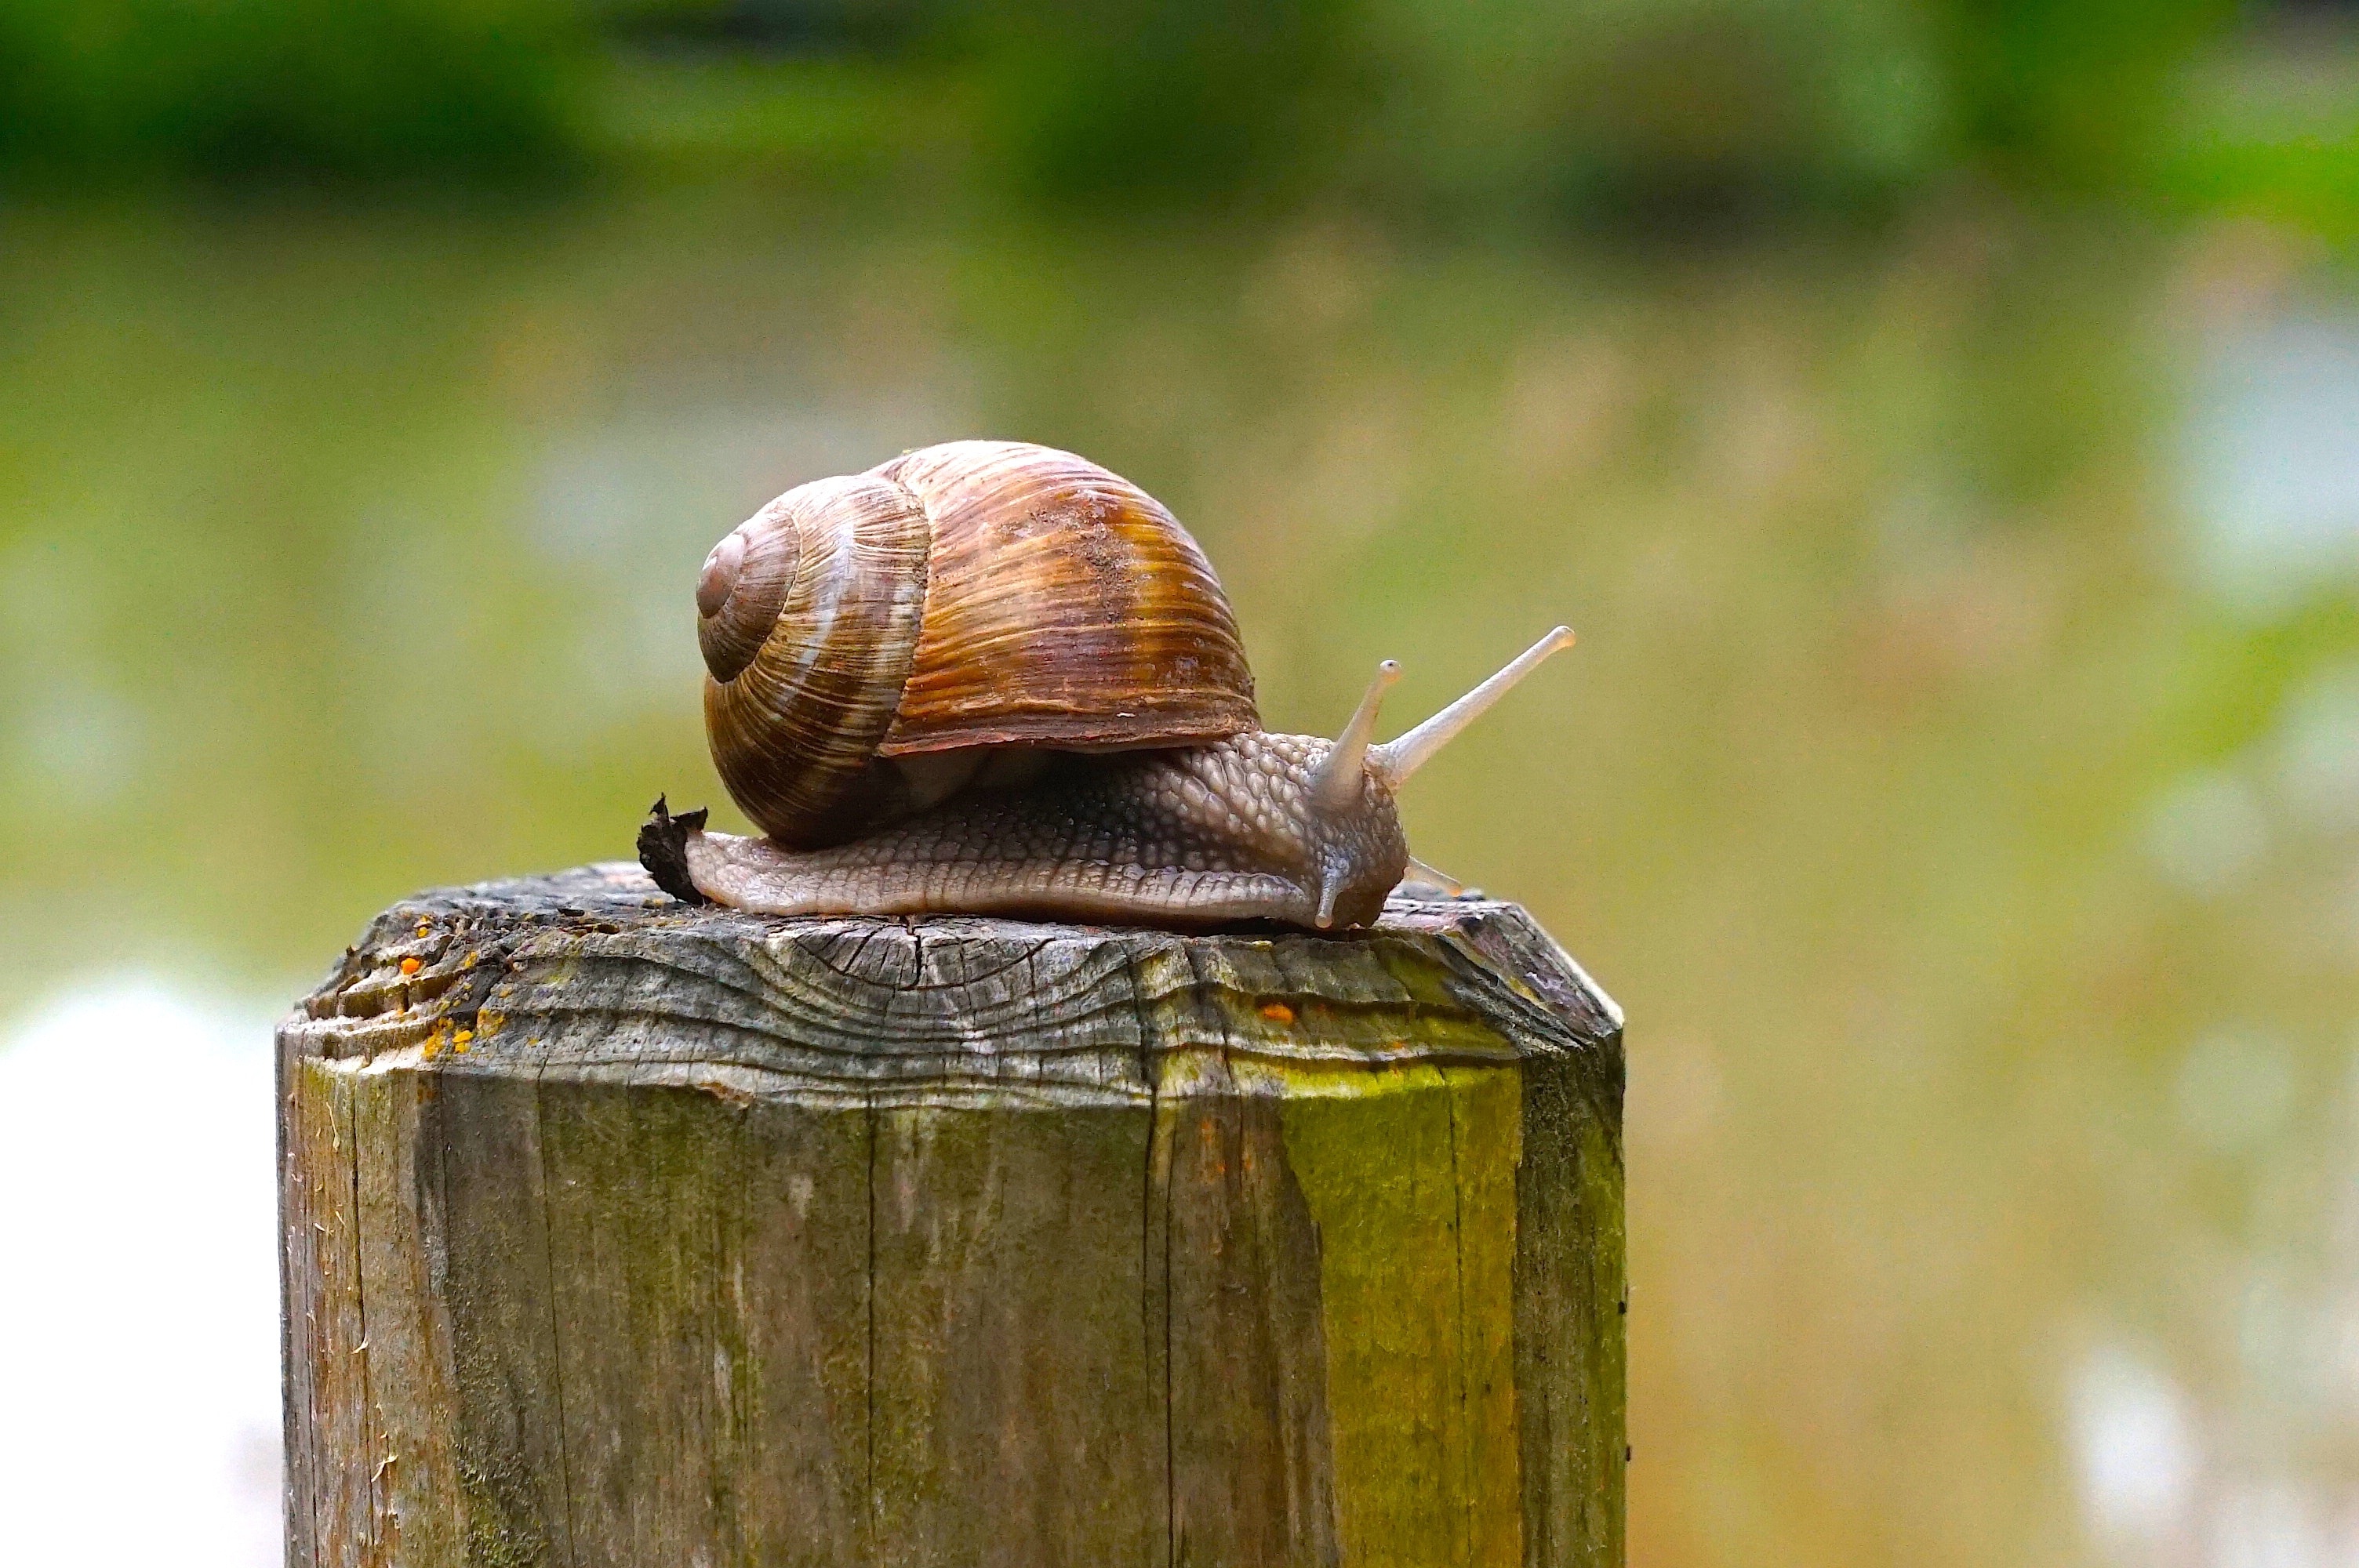 Snail, Wood Pile, Nature, Wood, snail, one animal